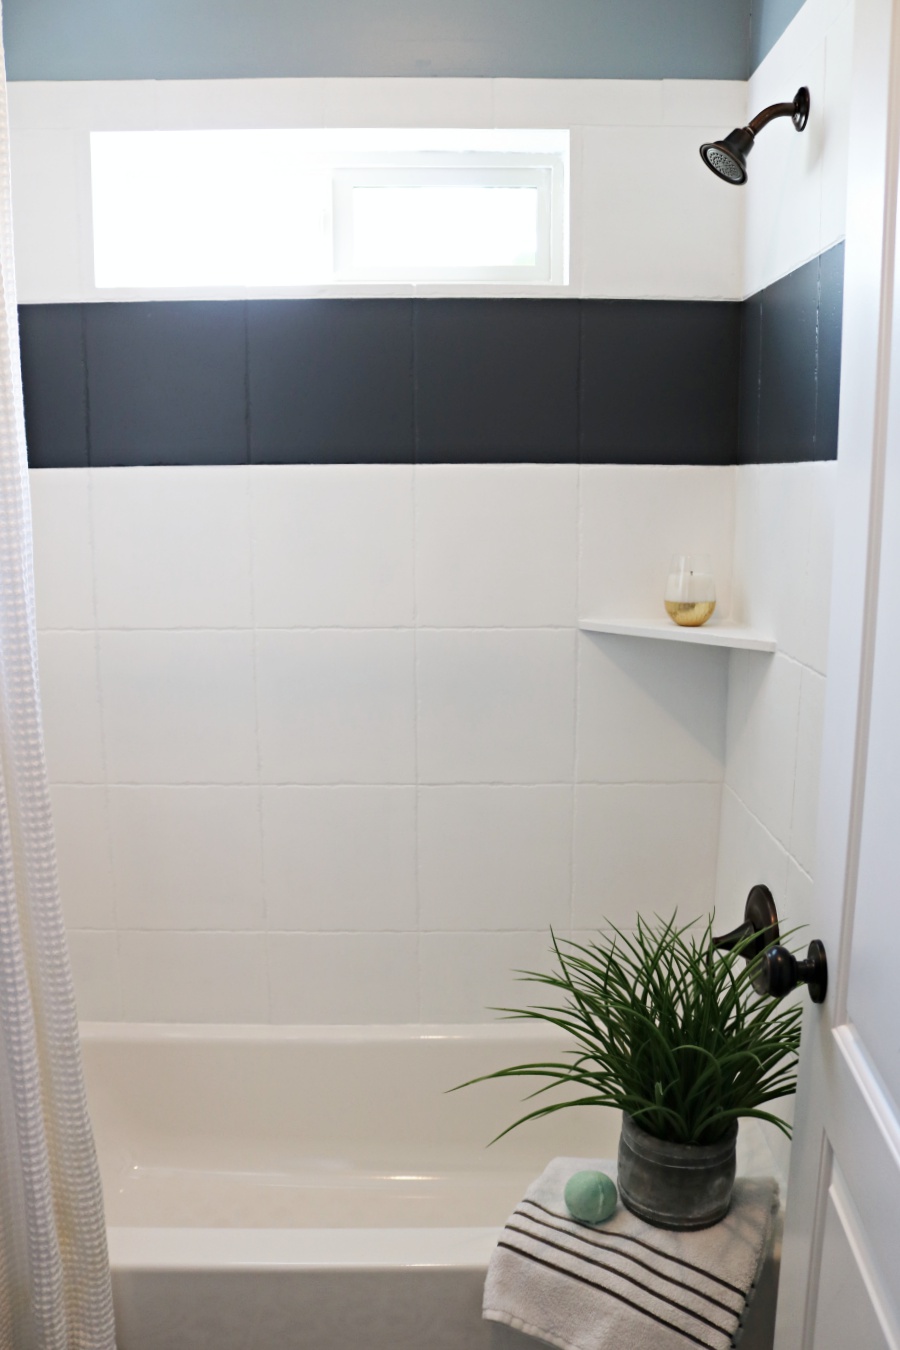 How To Paint Shower Tiles : More images for how to paint shower tiles ...